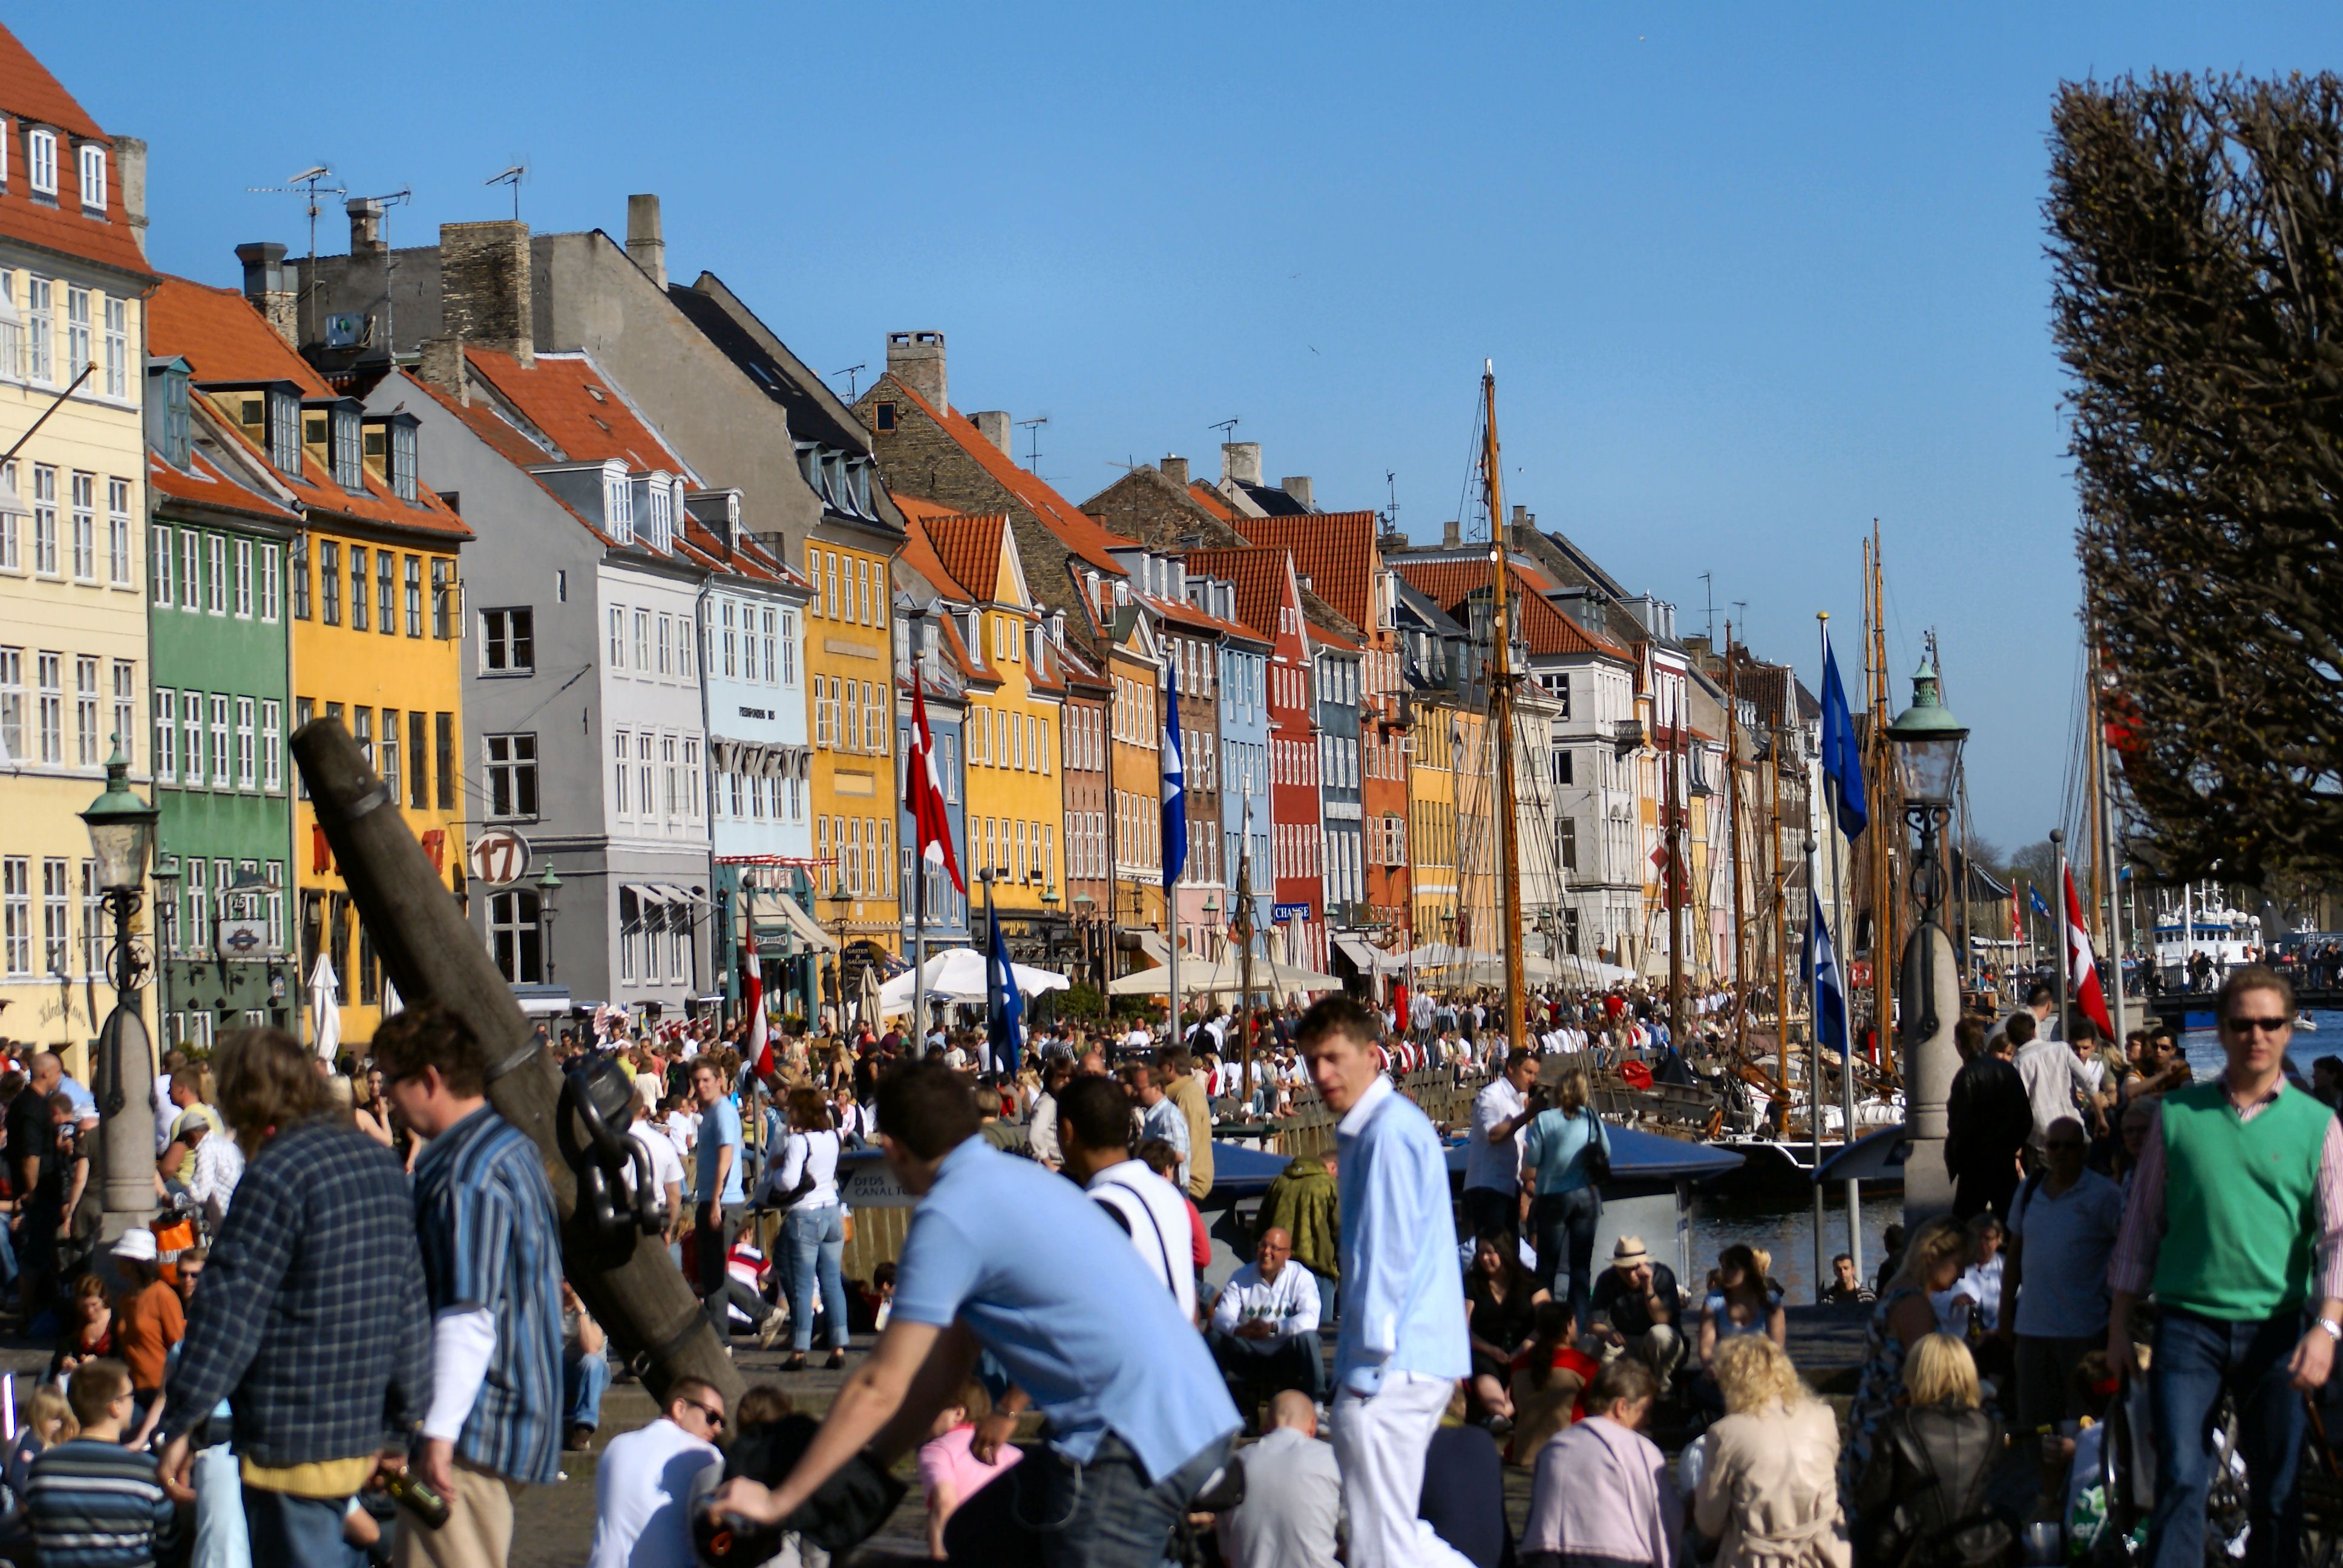 CNN names Nyhavn one of the happiest places in the world